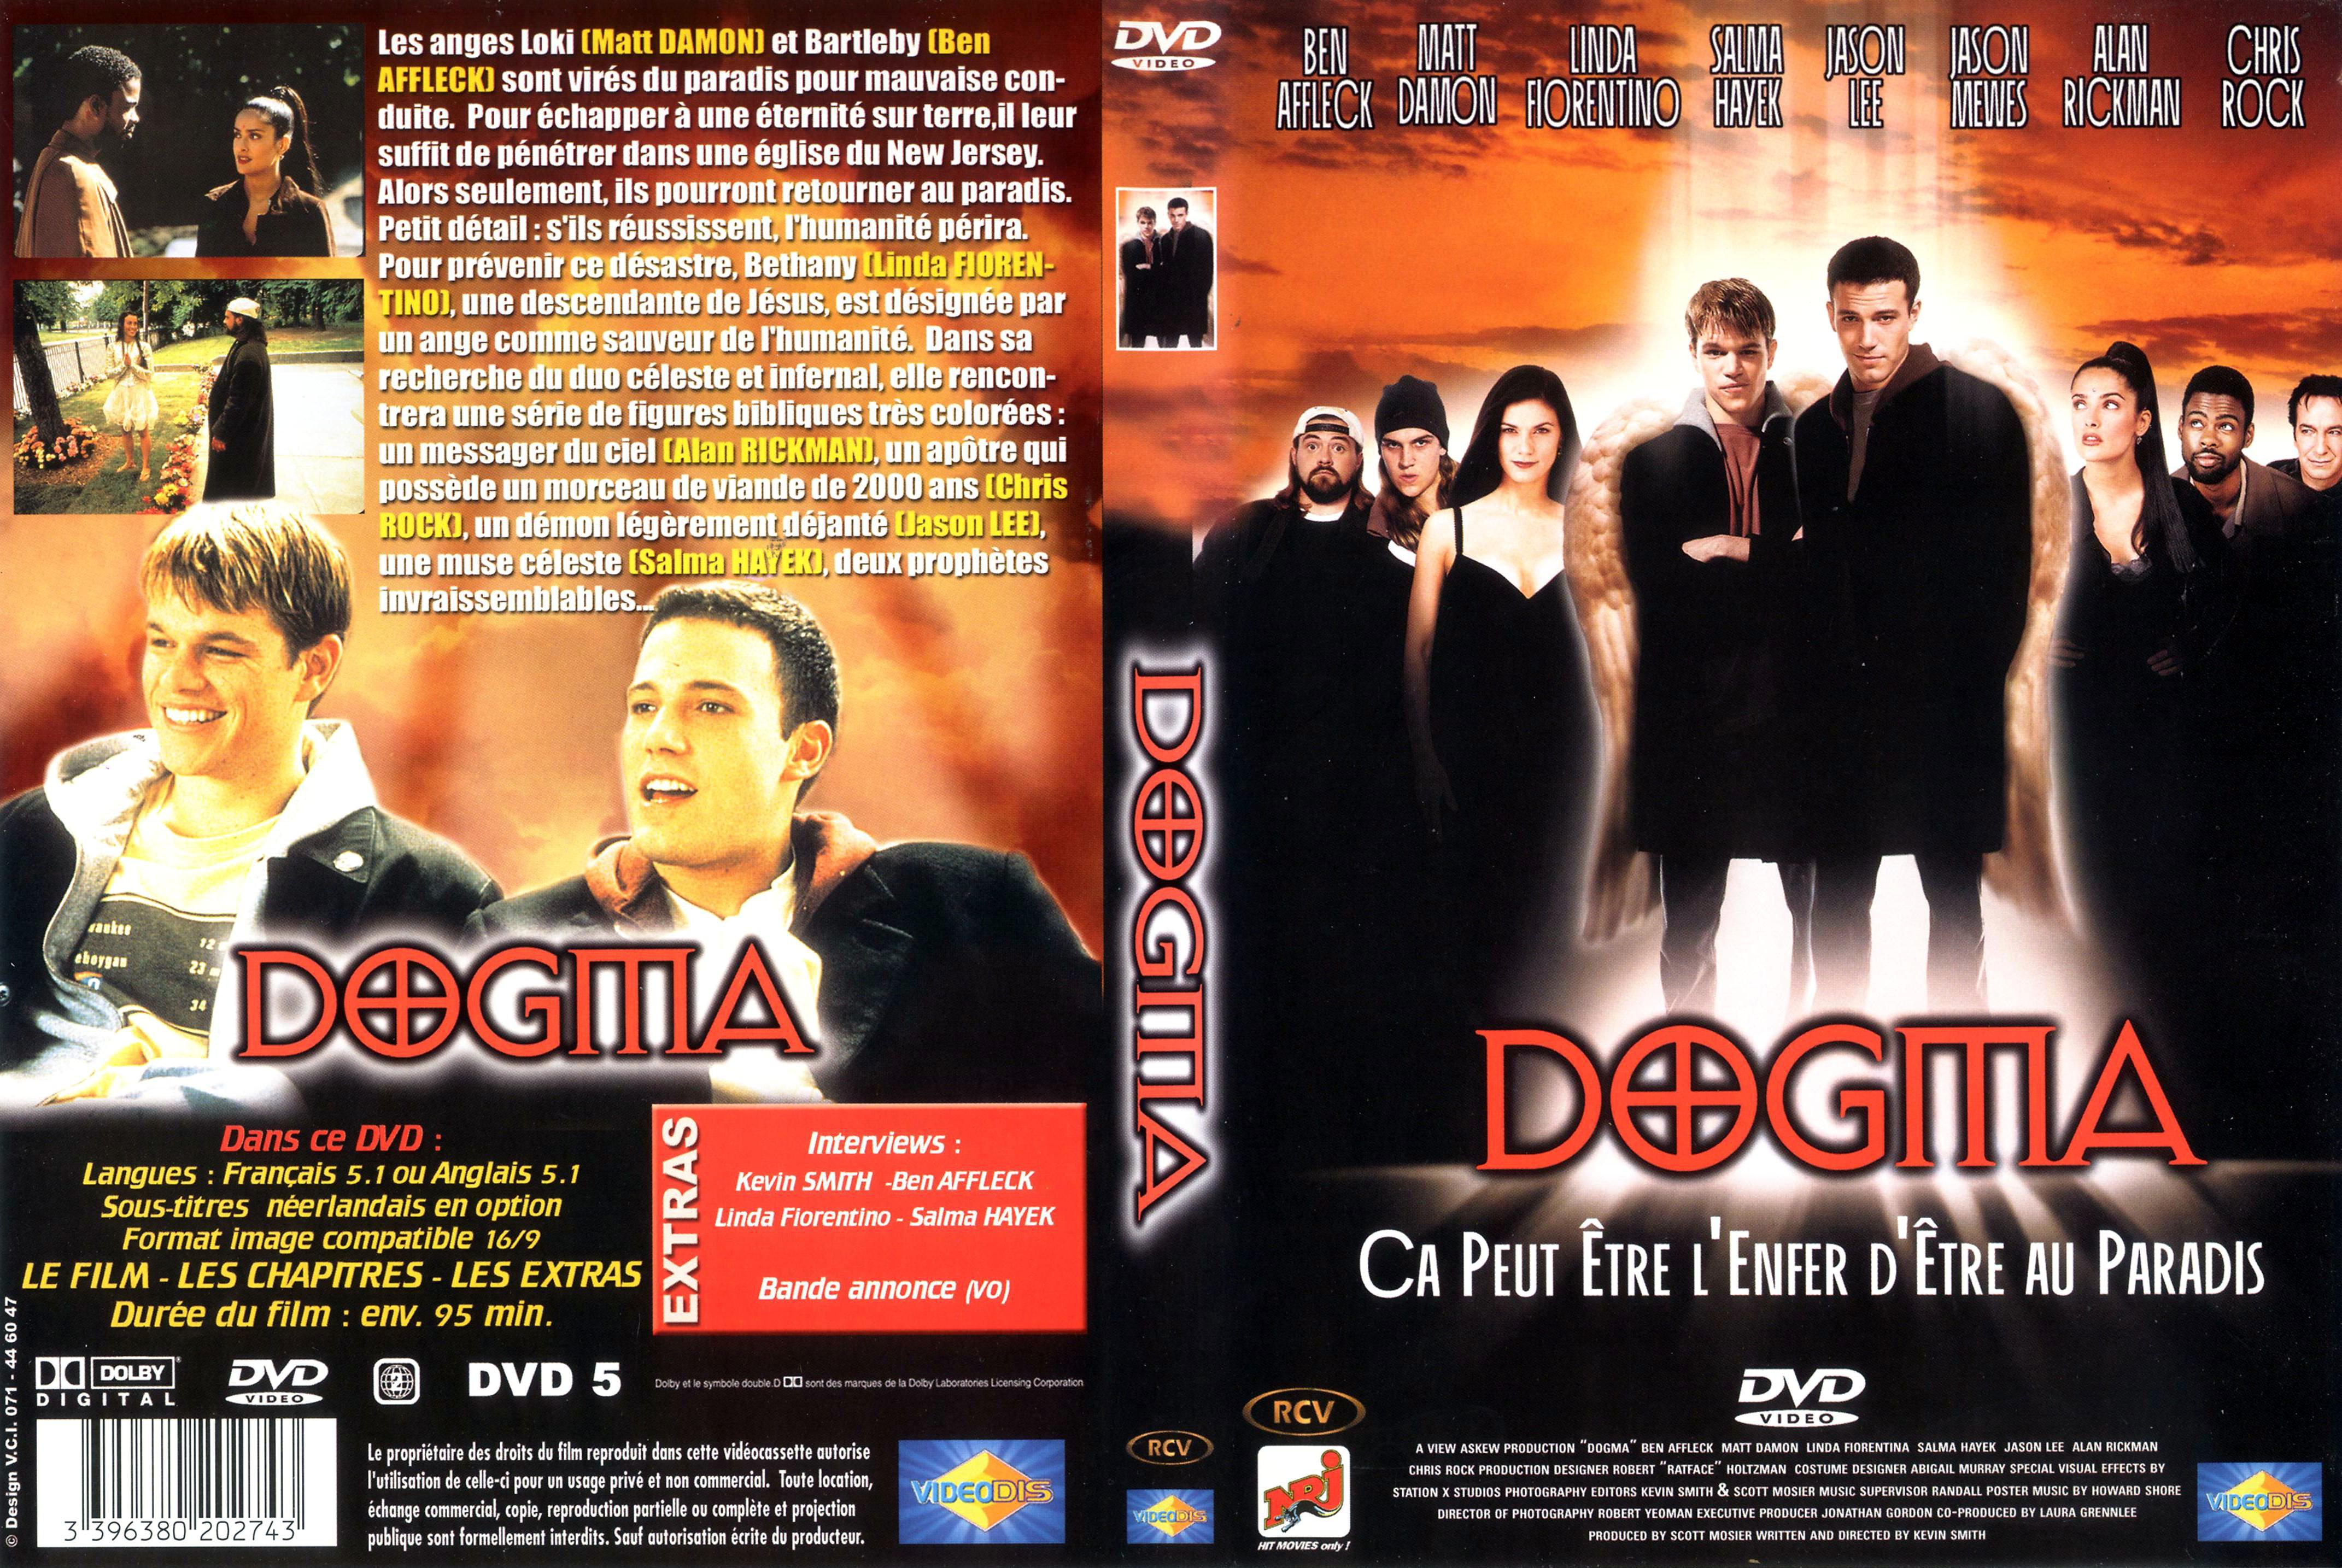 Jaquette DVD Dogma